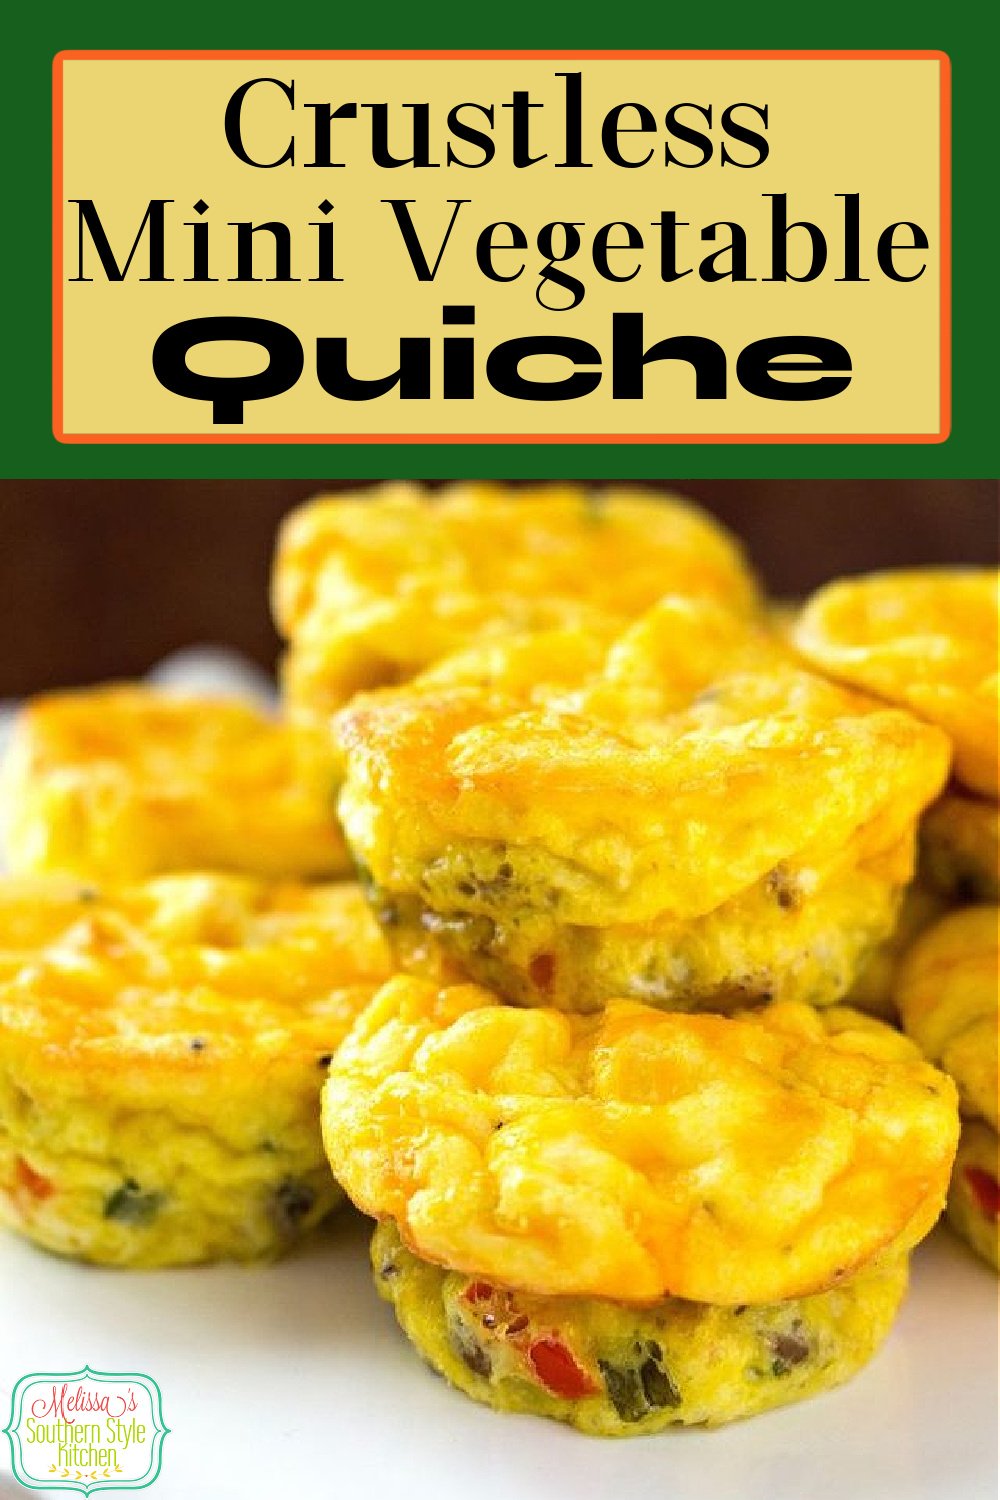 Make Crustless Mini Vegetable Quiche in a muffin pan and you can personalize each one to your taste #muffineggs #quicherecipes #muffinpanrecipes #eggmuffins #eggs #muffinrecipes #lowcarb #ketorecipes #vegetablequiche via @melissasssk